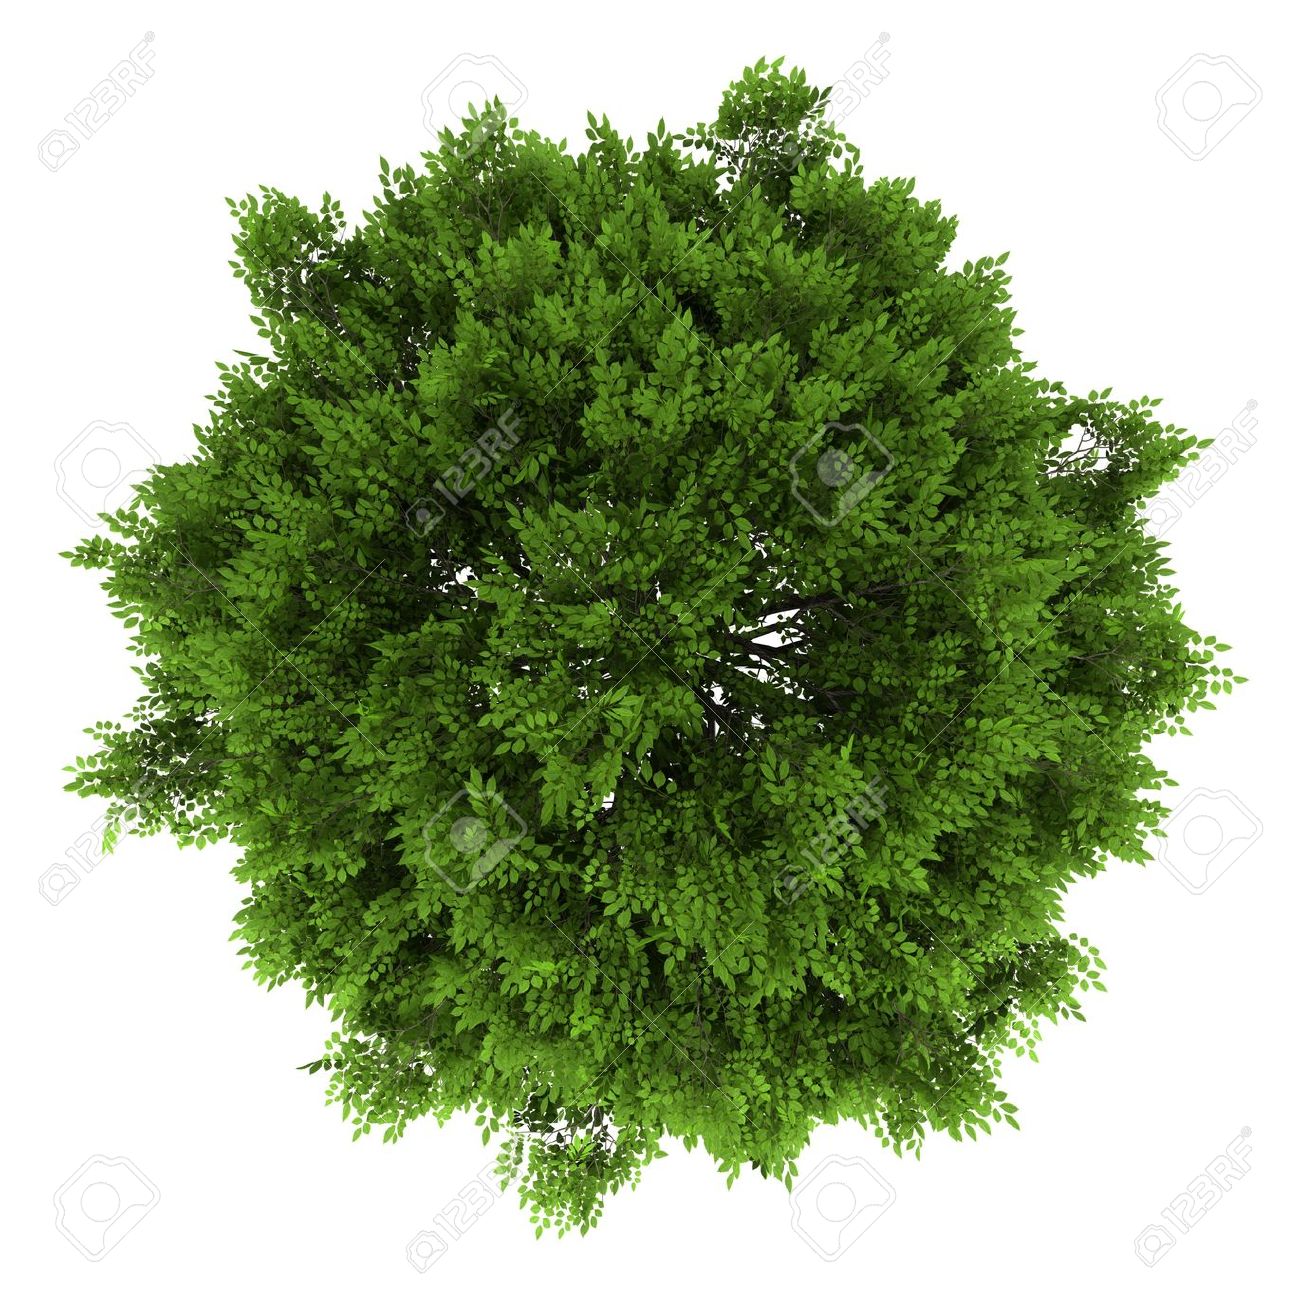 Tree PNG Top View Transparent Tree Top View.PNG Images. | PlusPNG